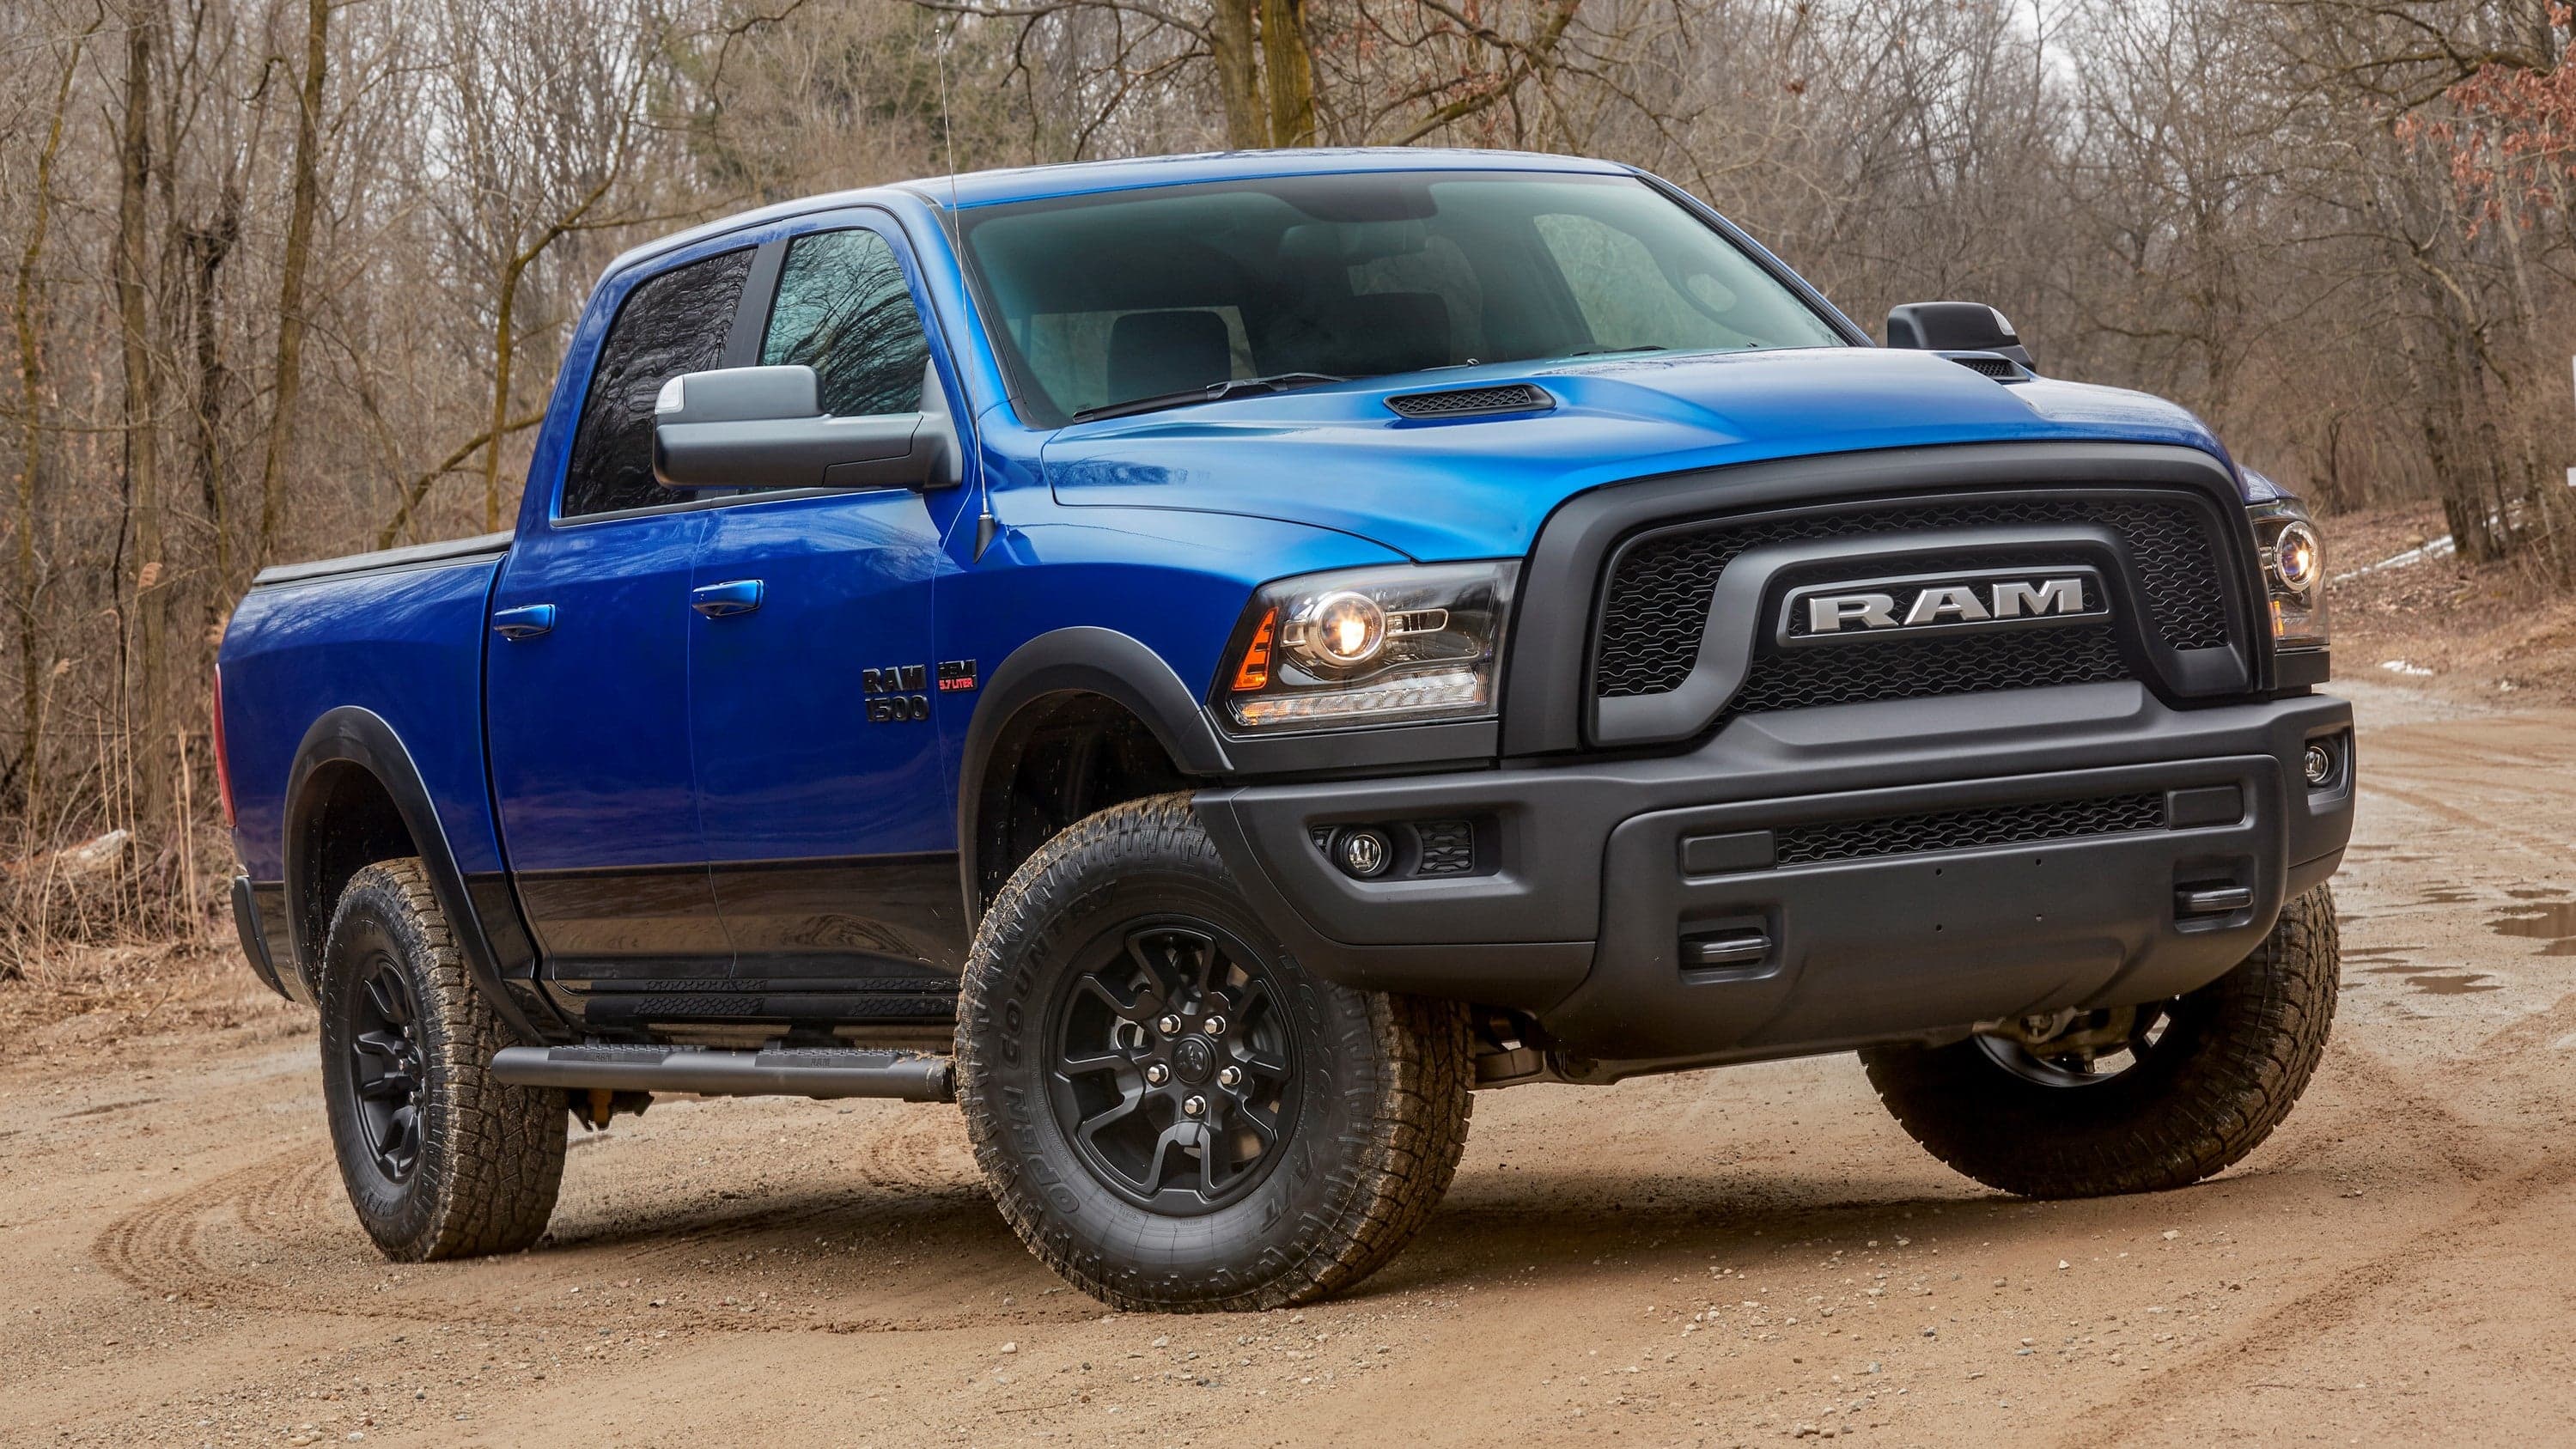 You Can Get an Amazing Deal on a 2018 Ram 1500 Pickup Right Now